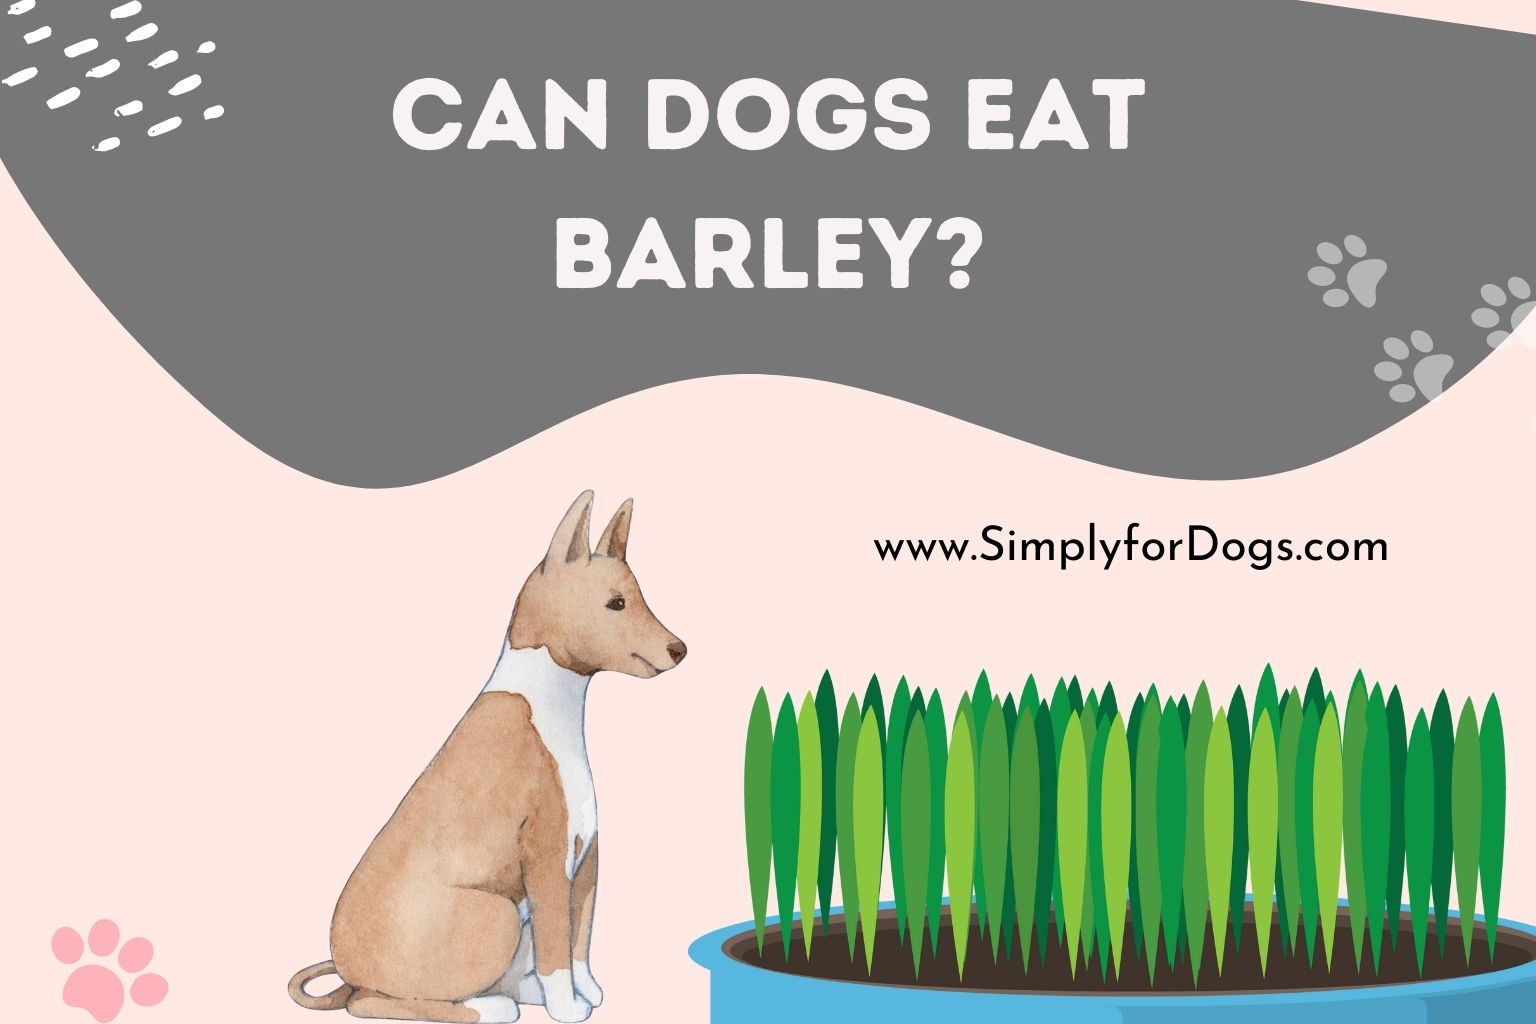 Can Dogs Eat Barley